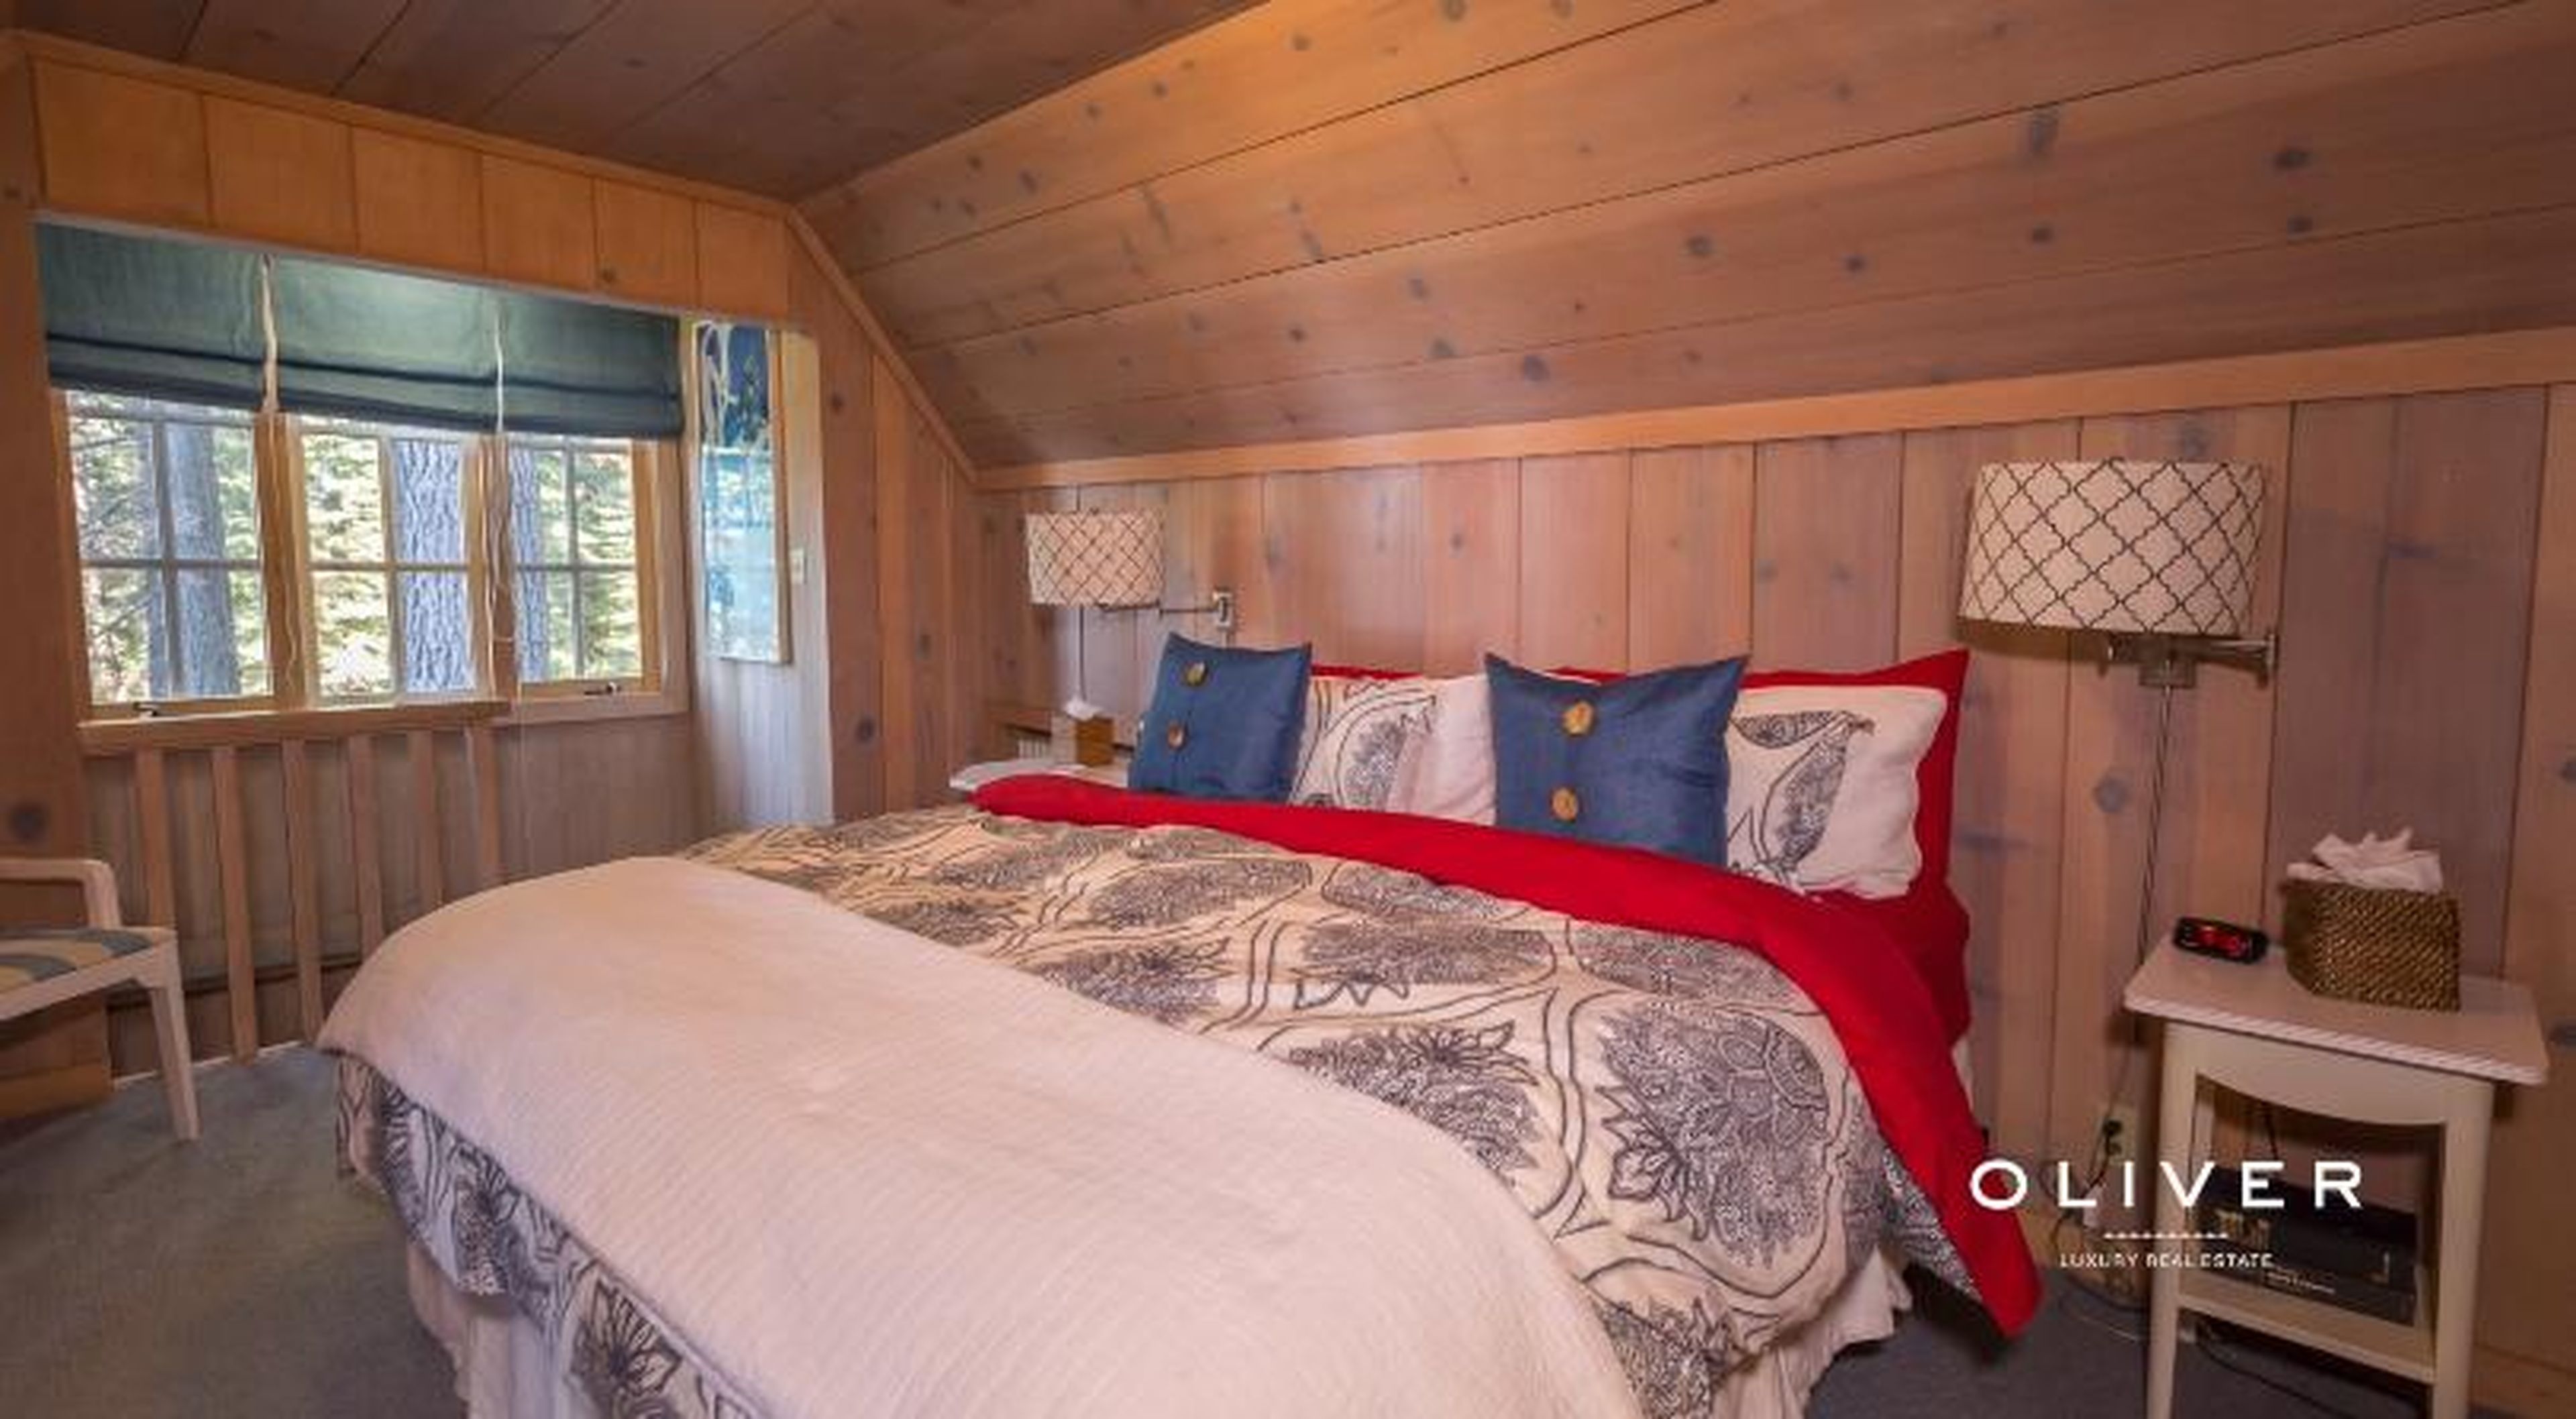 Additional bedrooms for guests are bountiful.